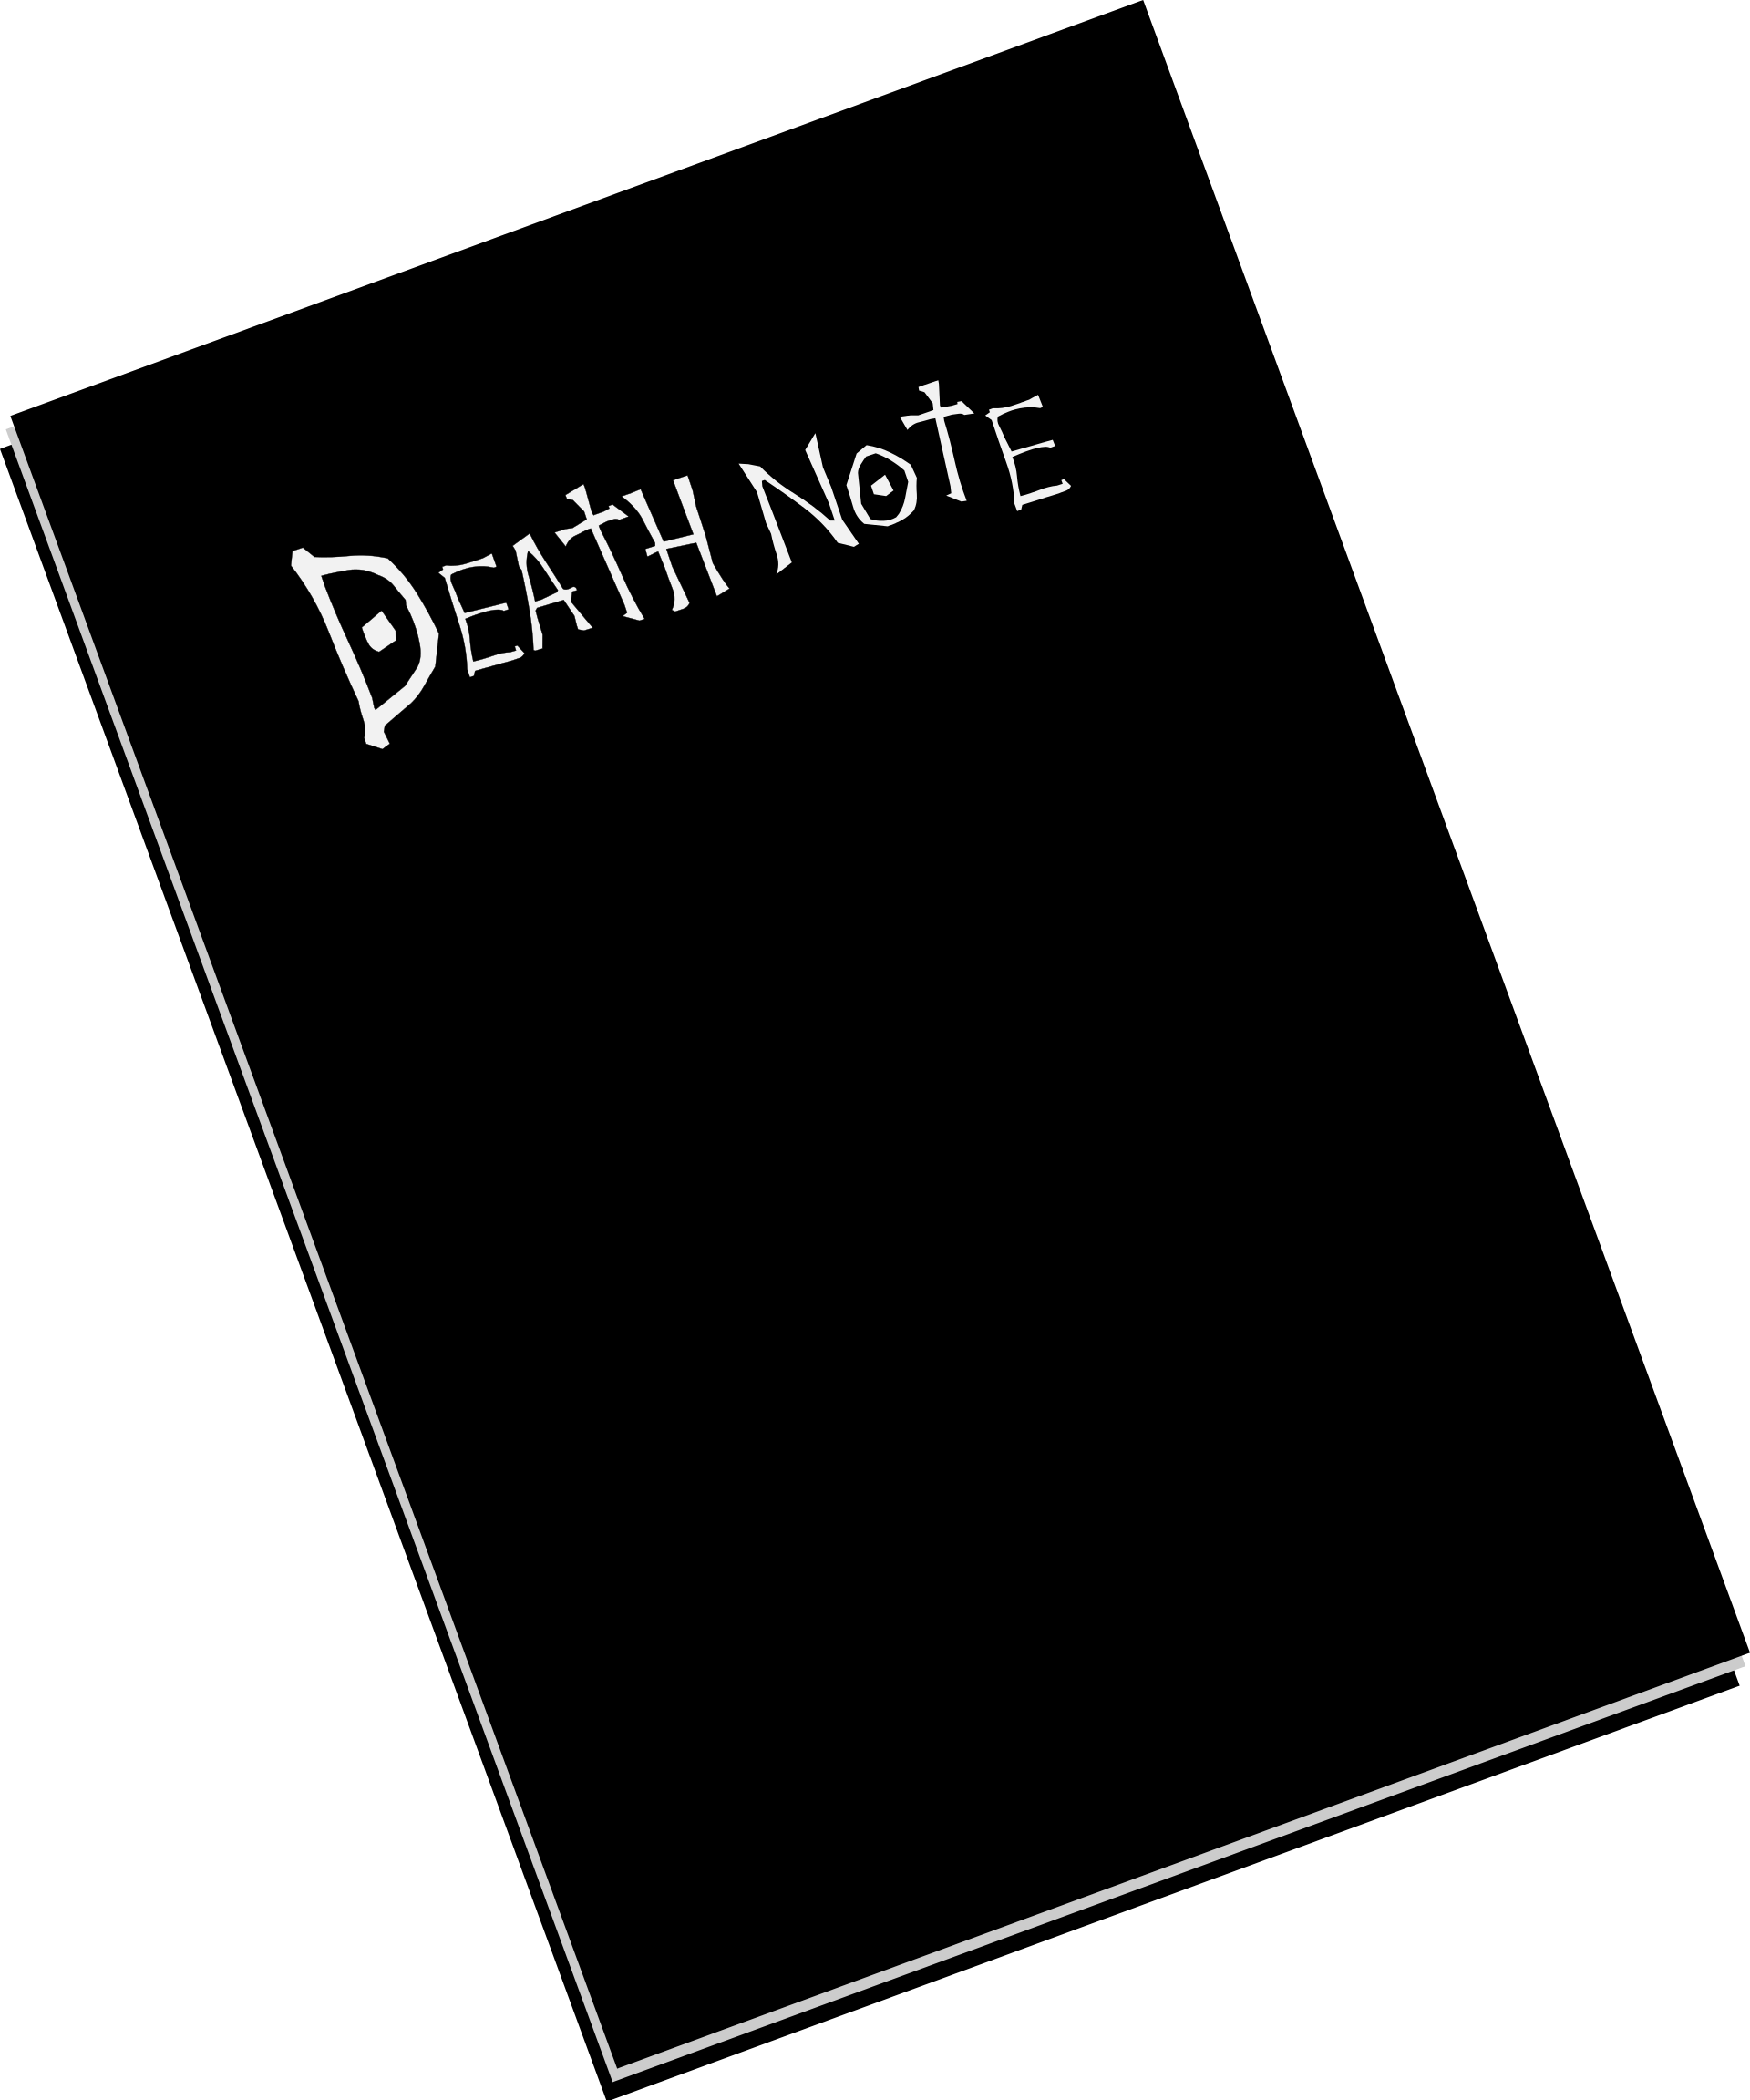 Typical design of a Death Note